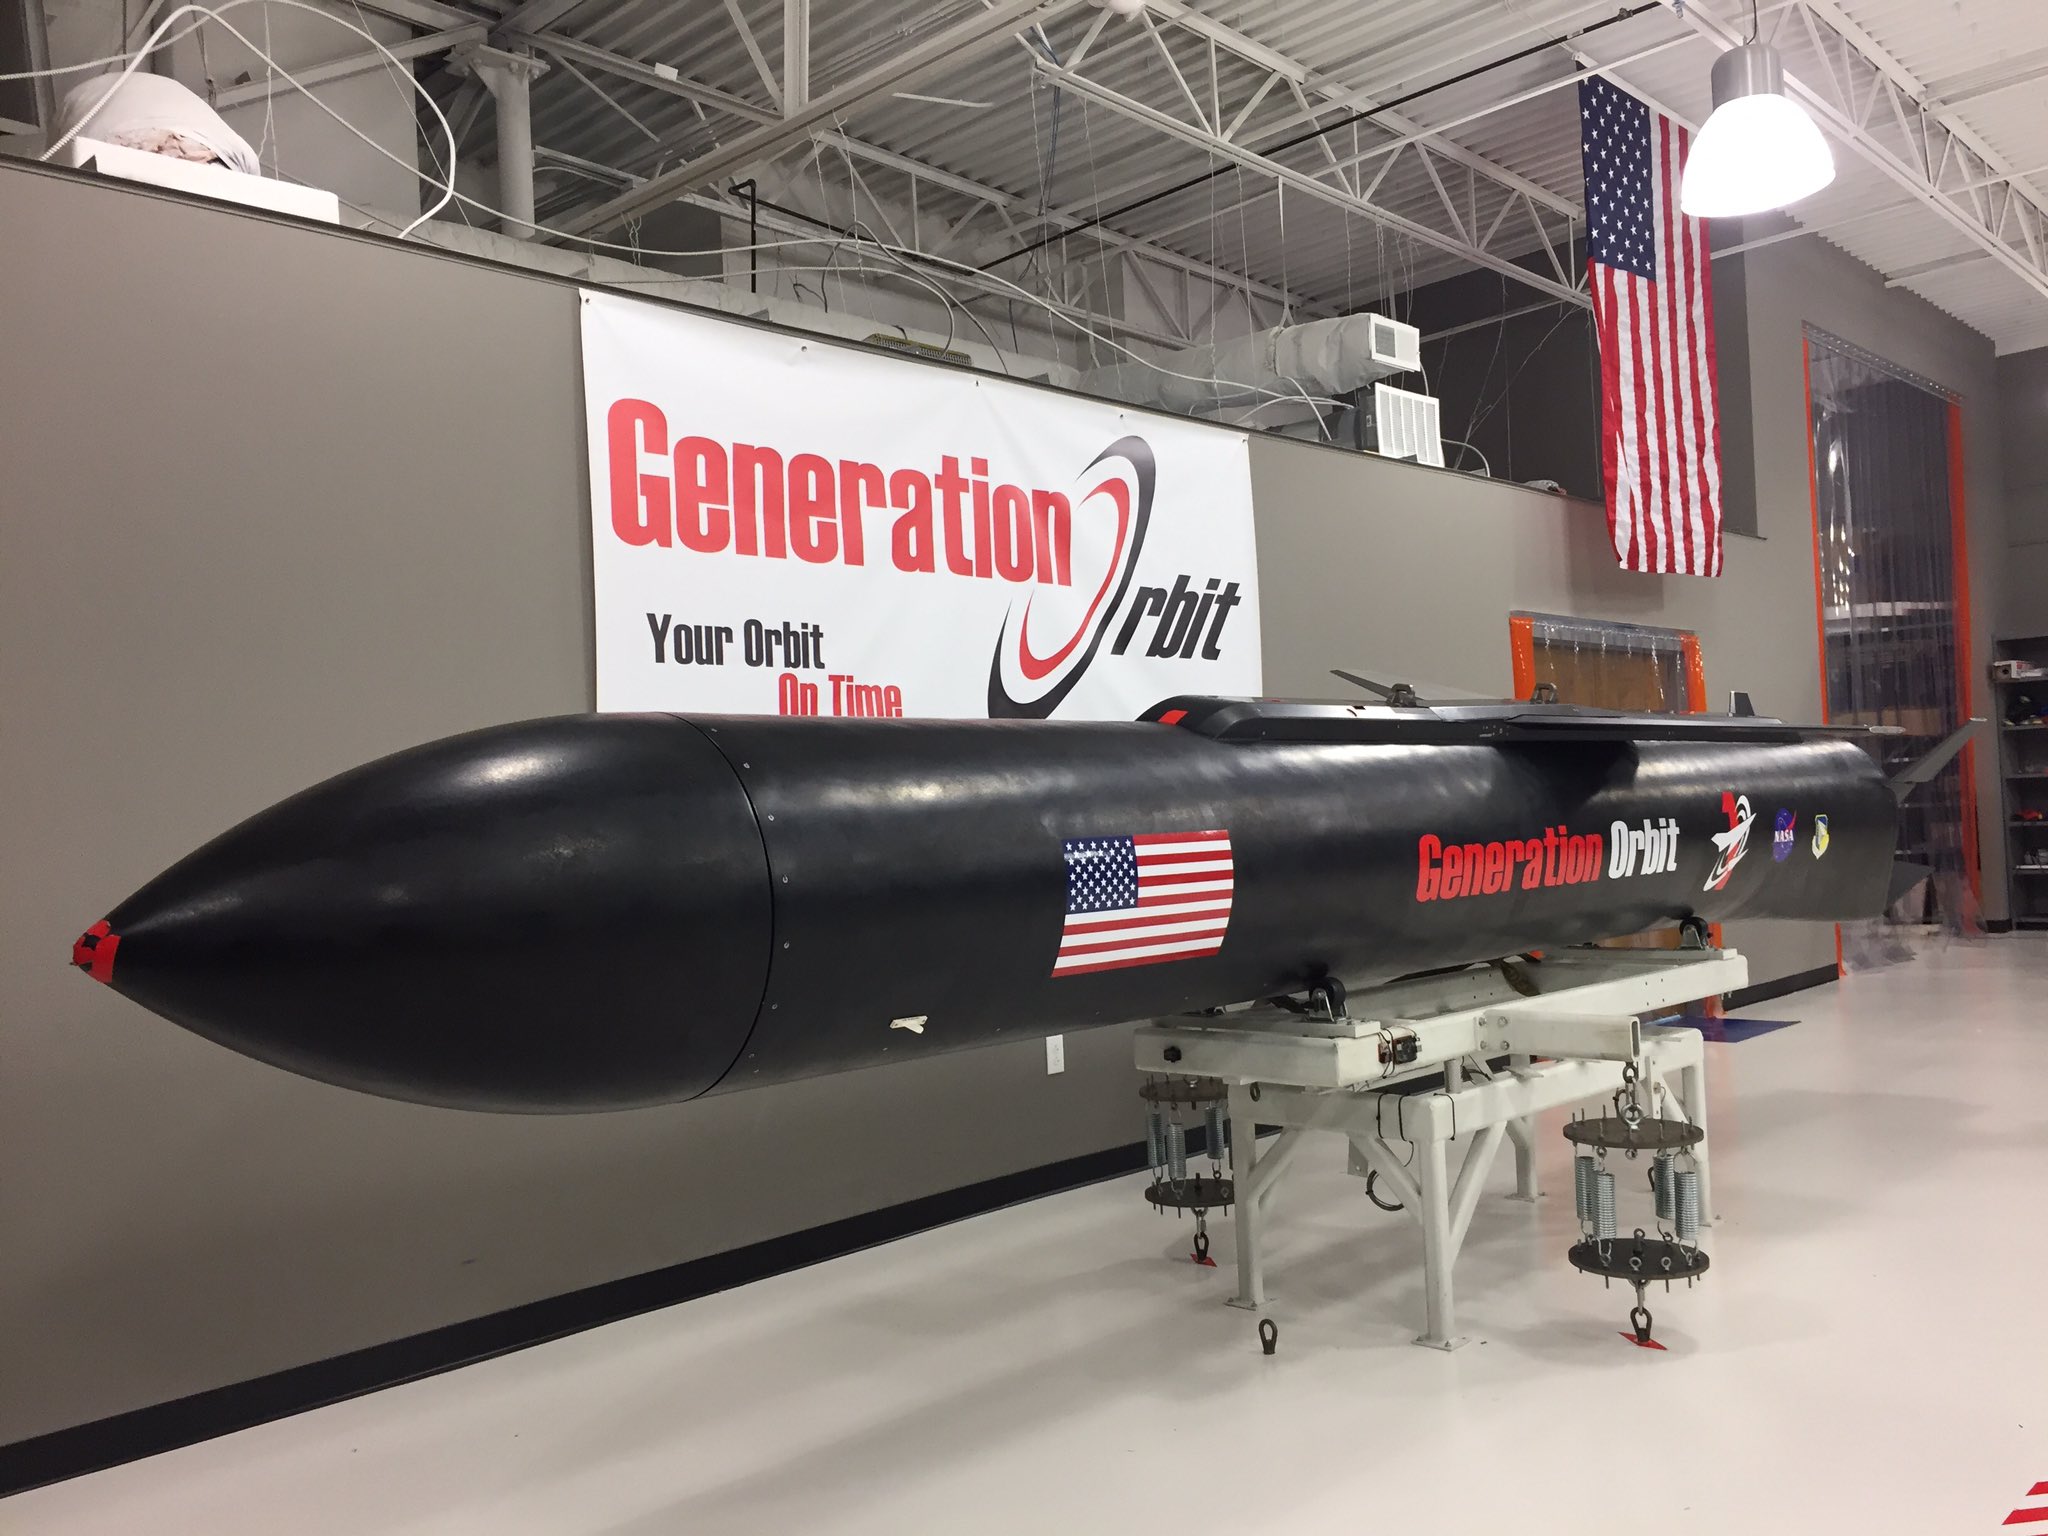 X-60A hypersonic flight research vehicle program completes critical design review